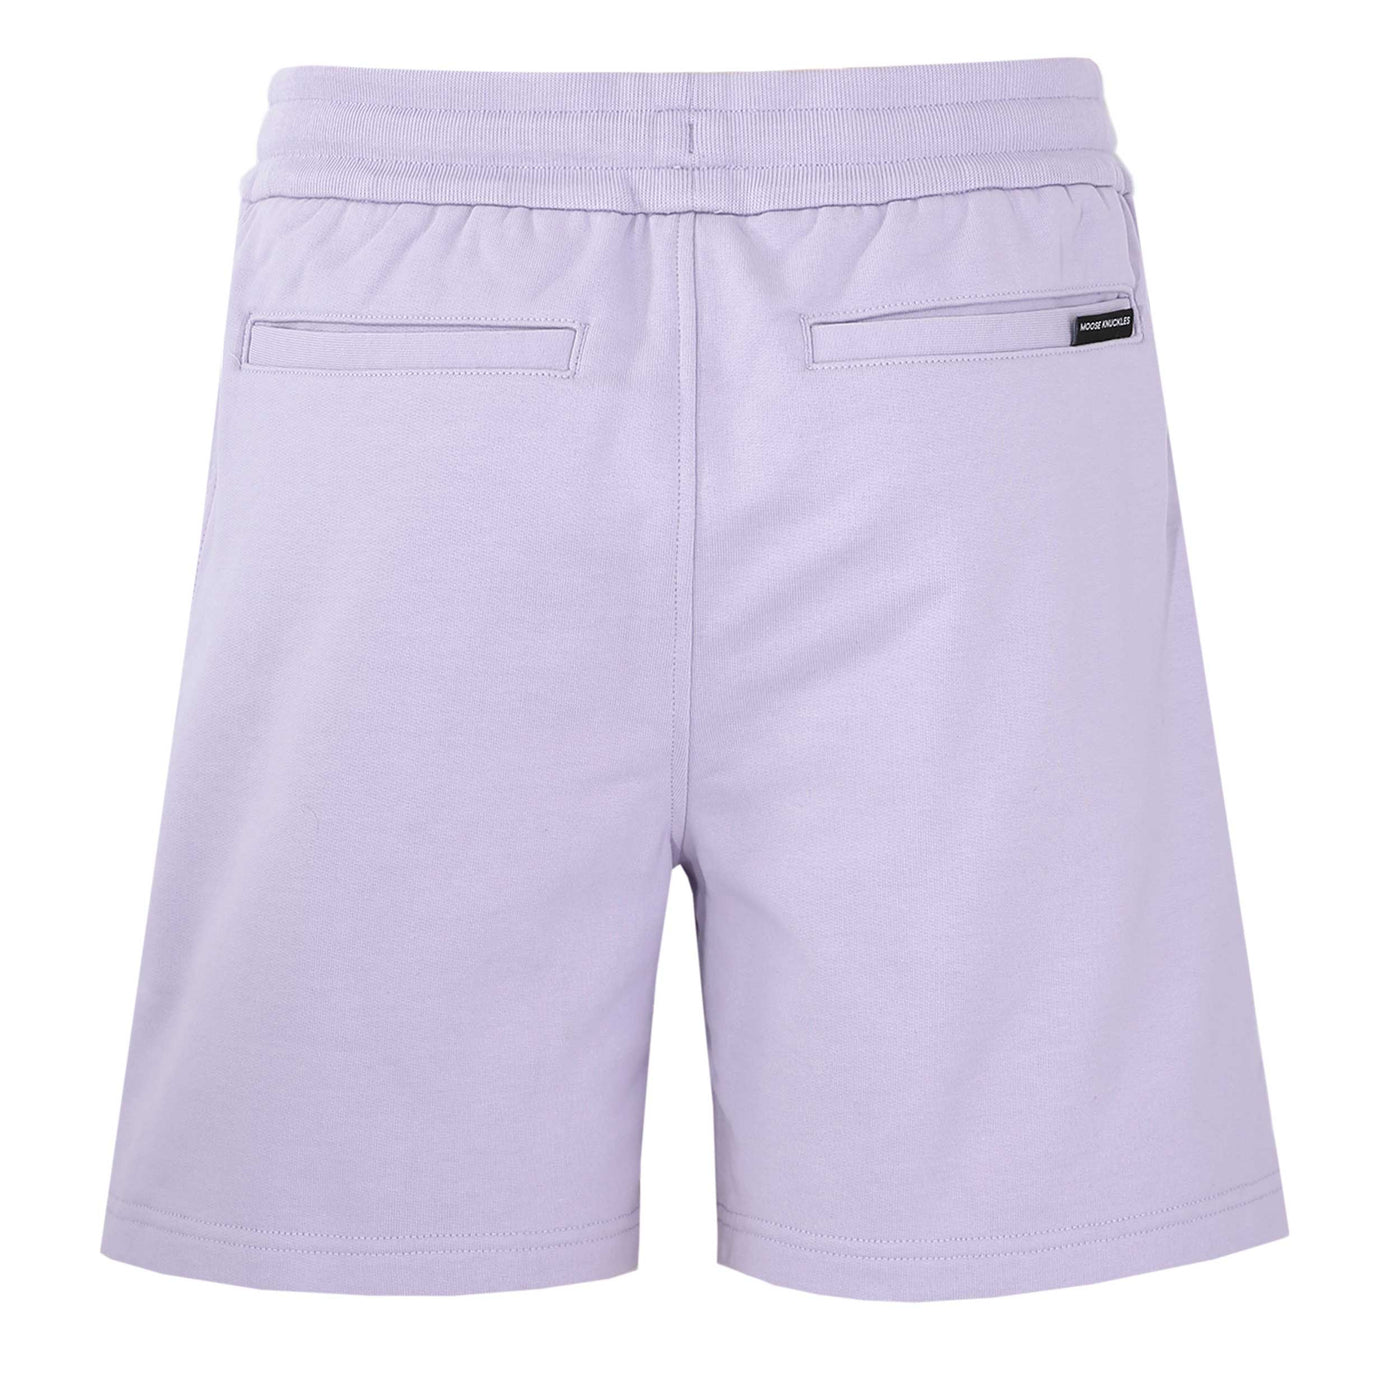 Moose Knuckles Clyde Shorts Sweat Short in Orchid Petal Back